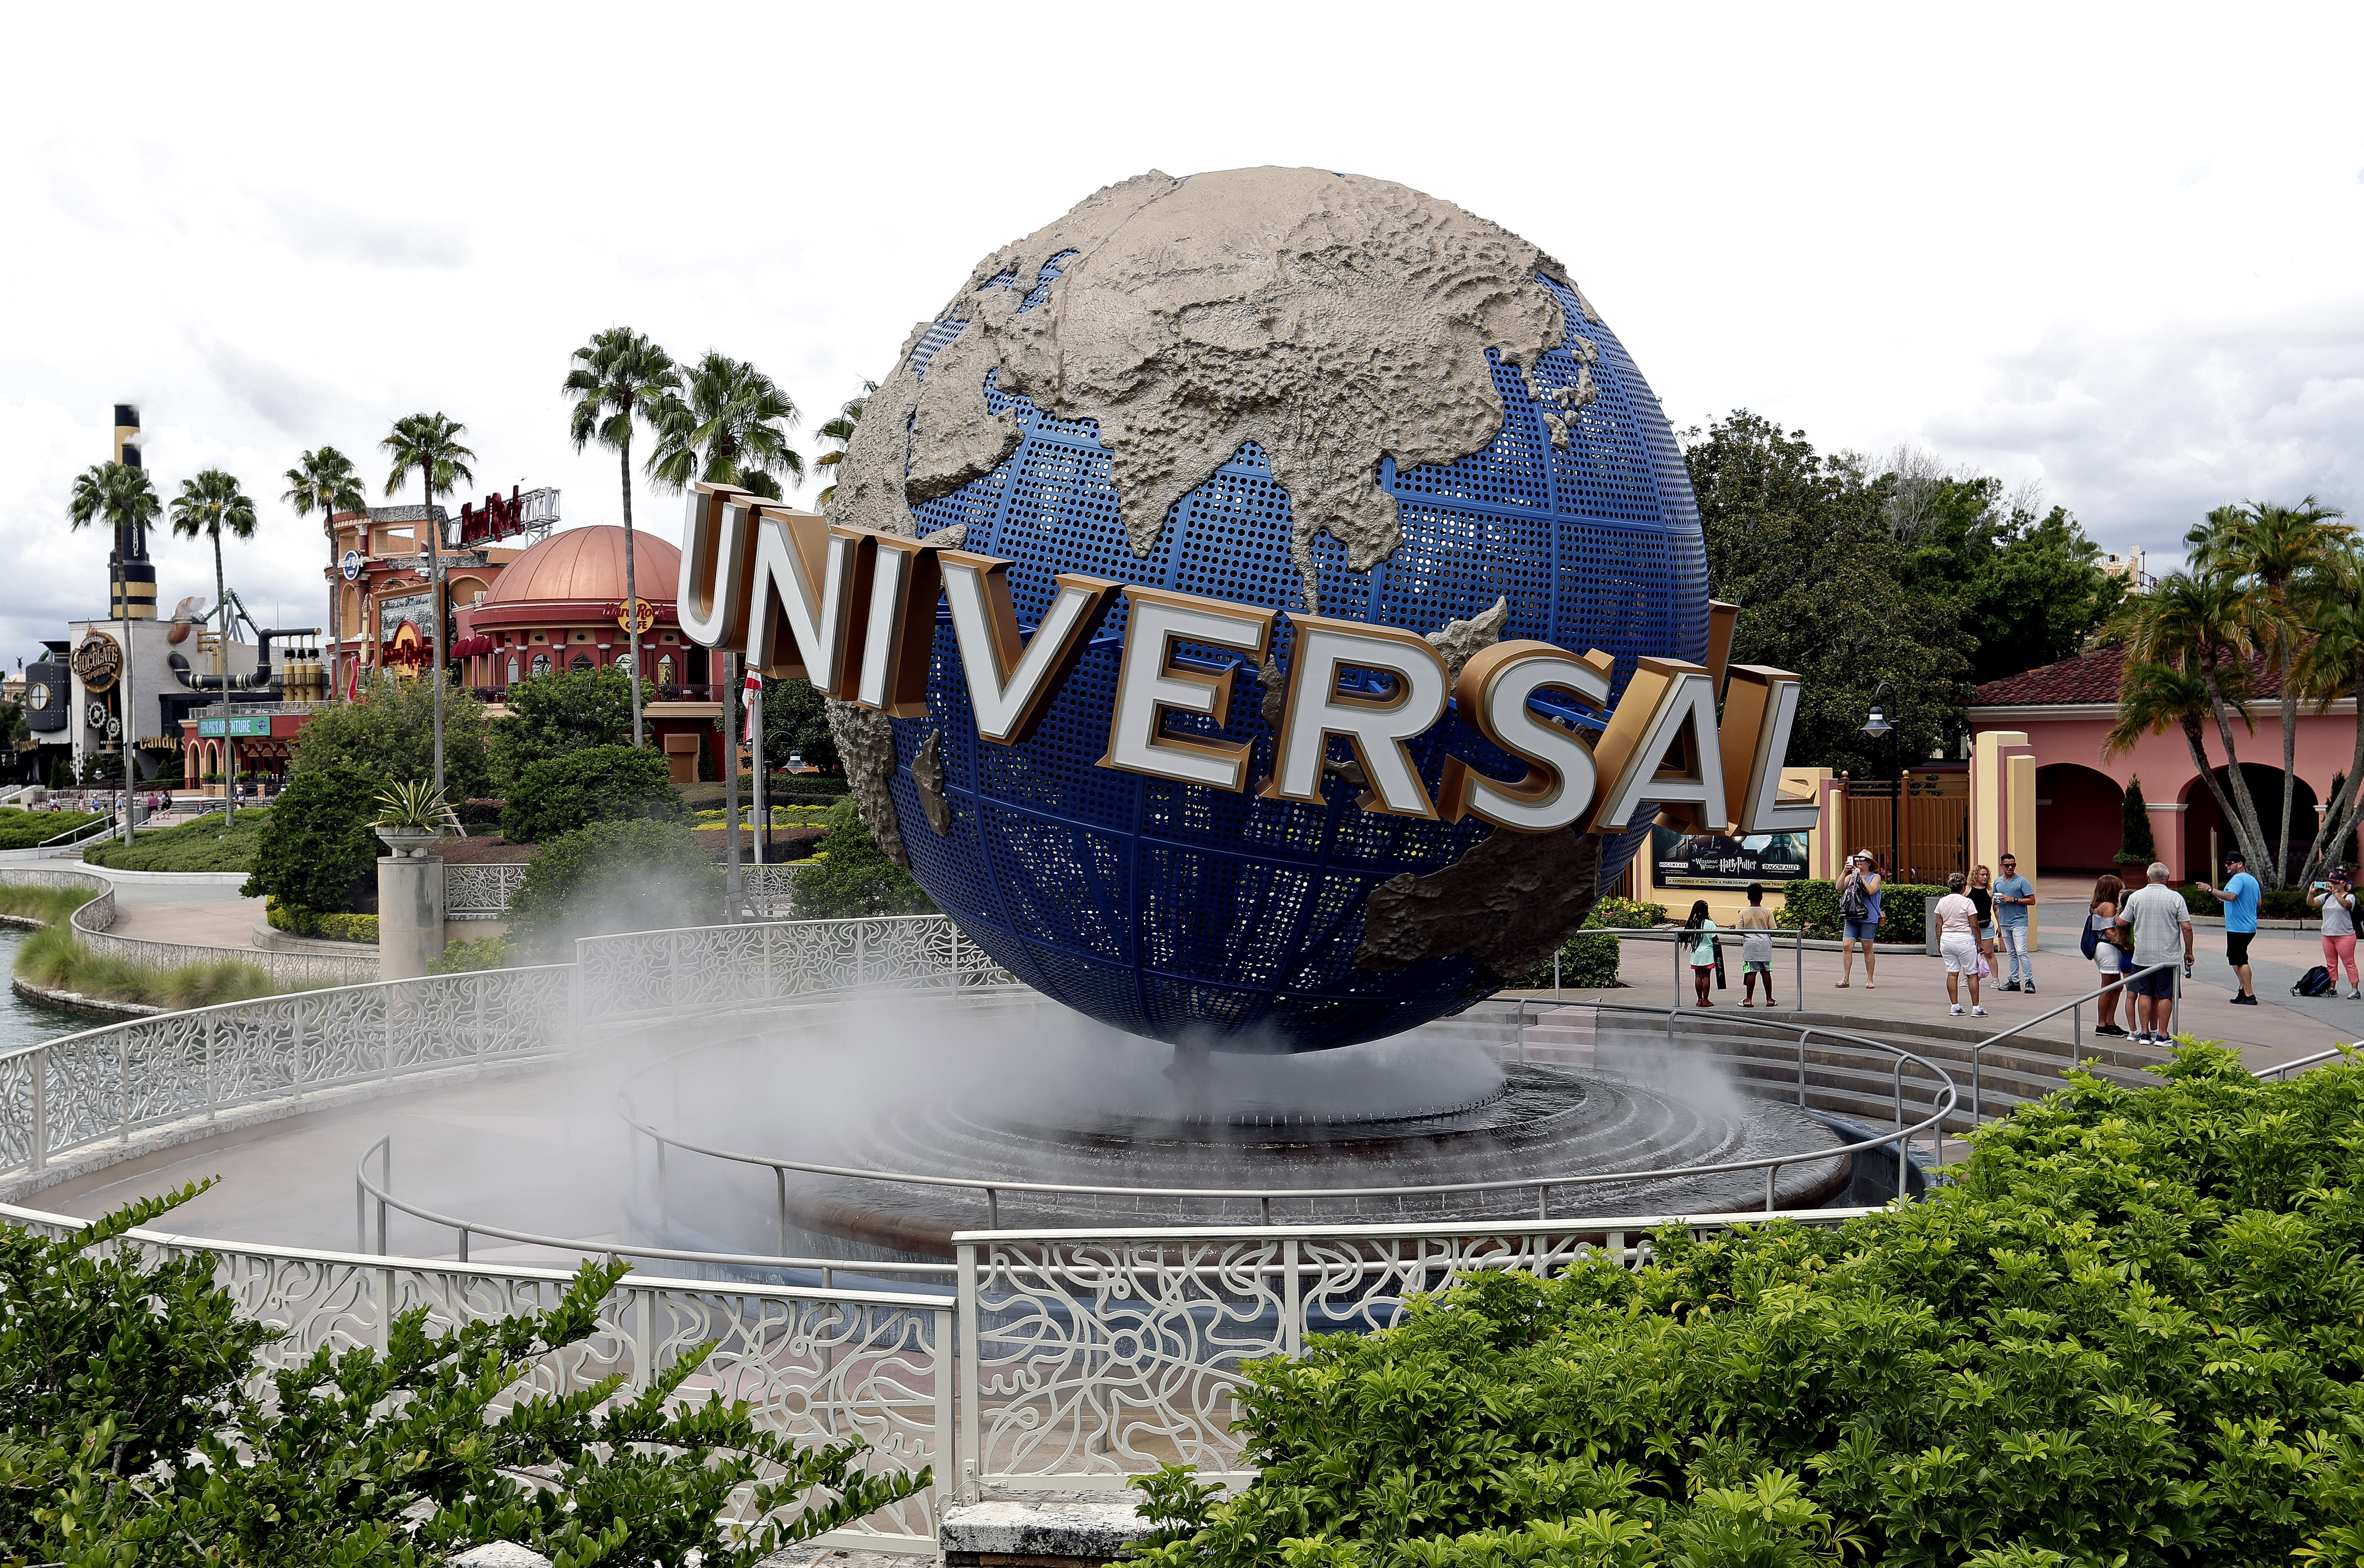 Get free access to Universal Orlando through Dec. 24 with purchase of  park-to-park ticket